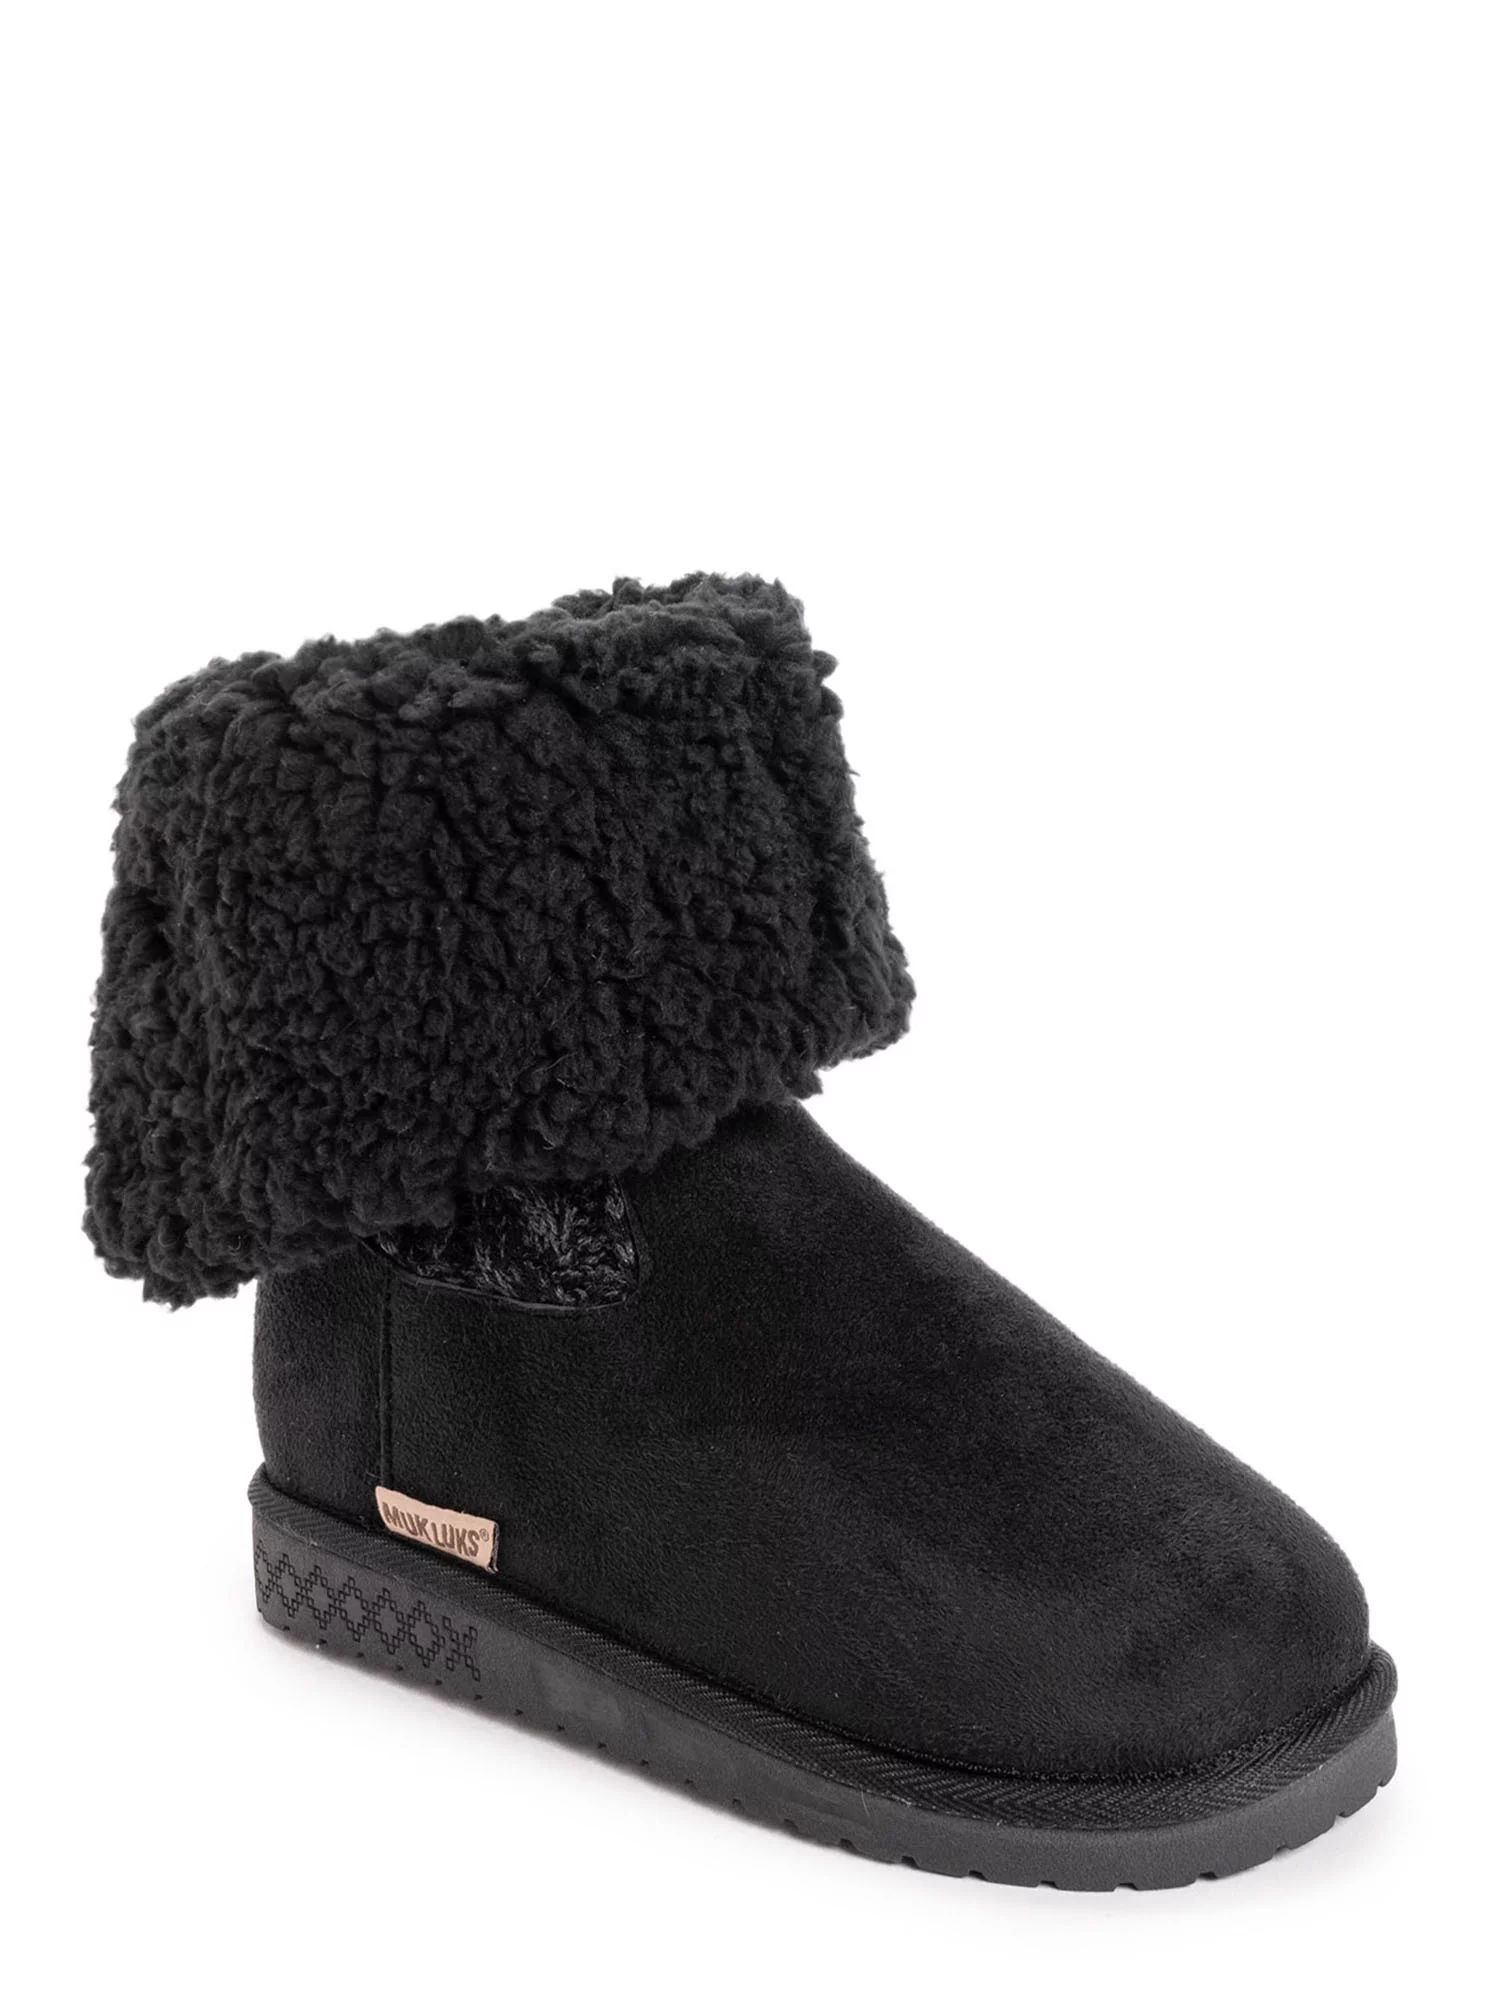 Muk Luks Women's Fold Over Boots (Wide Width Available) | Walmart (US)